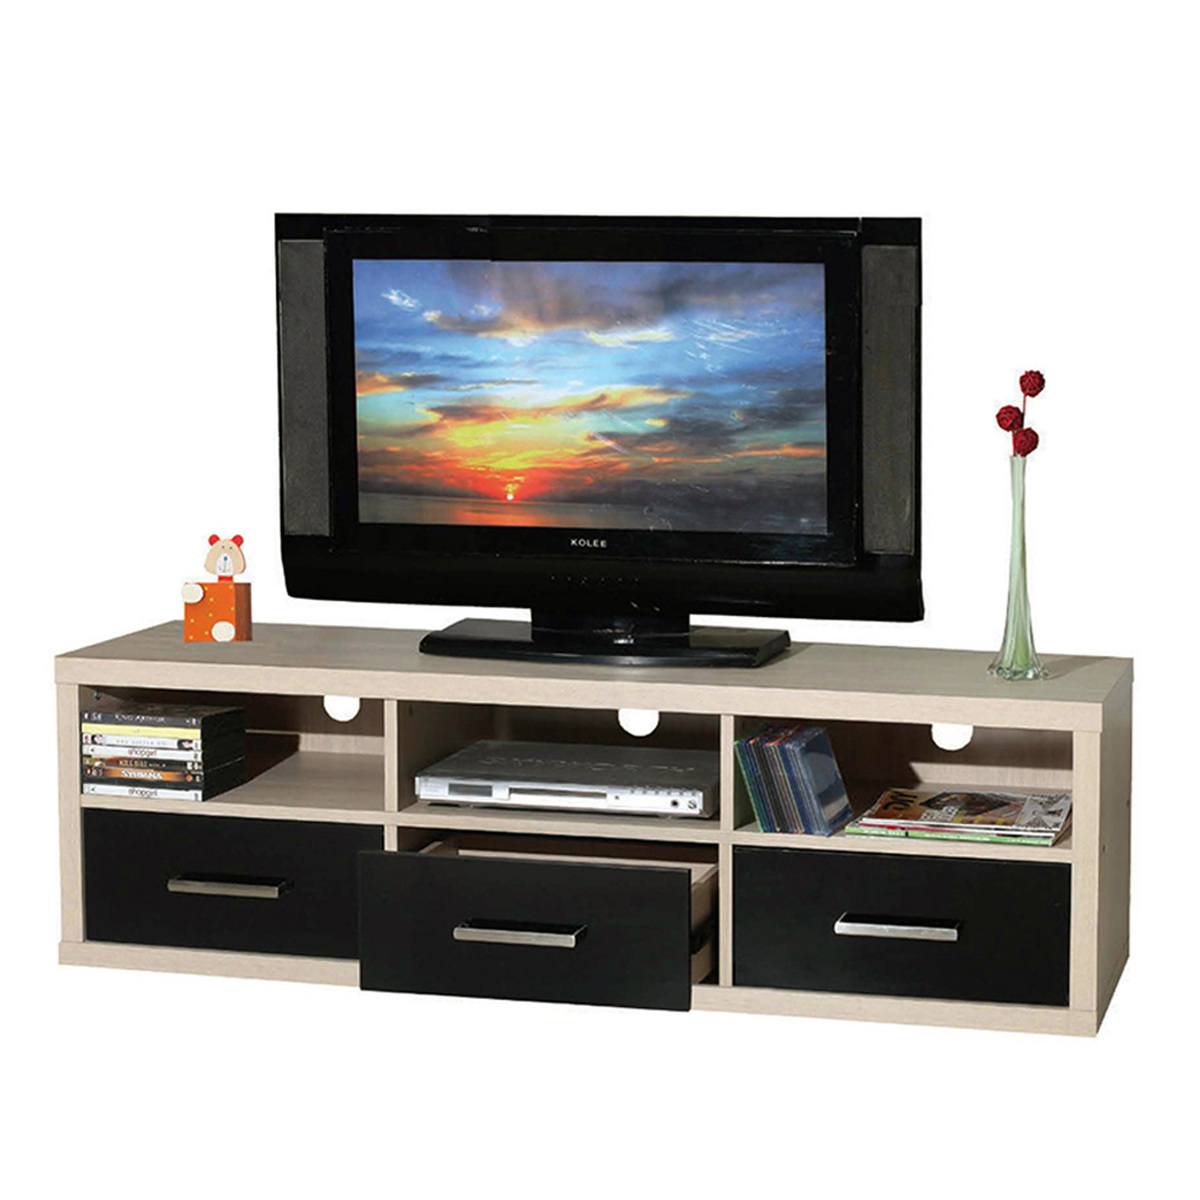 Heveapac TV Cabinet H5299